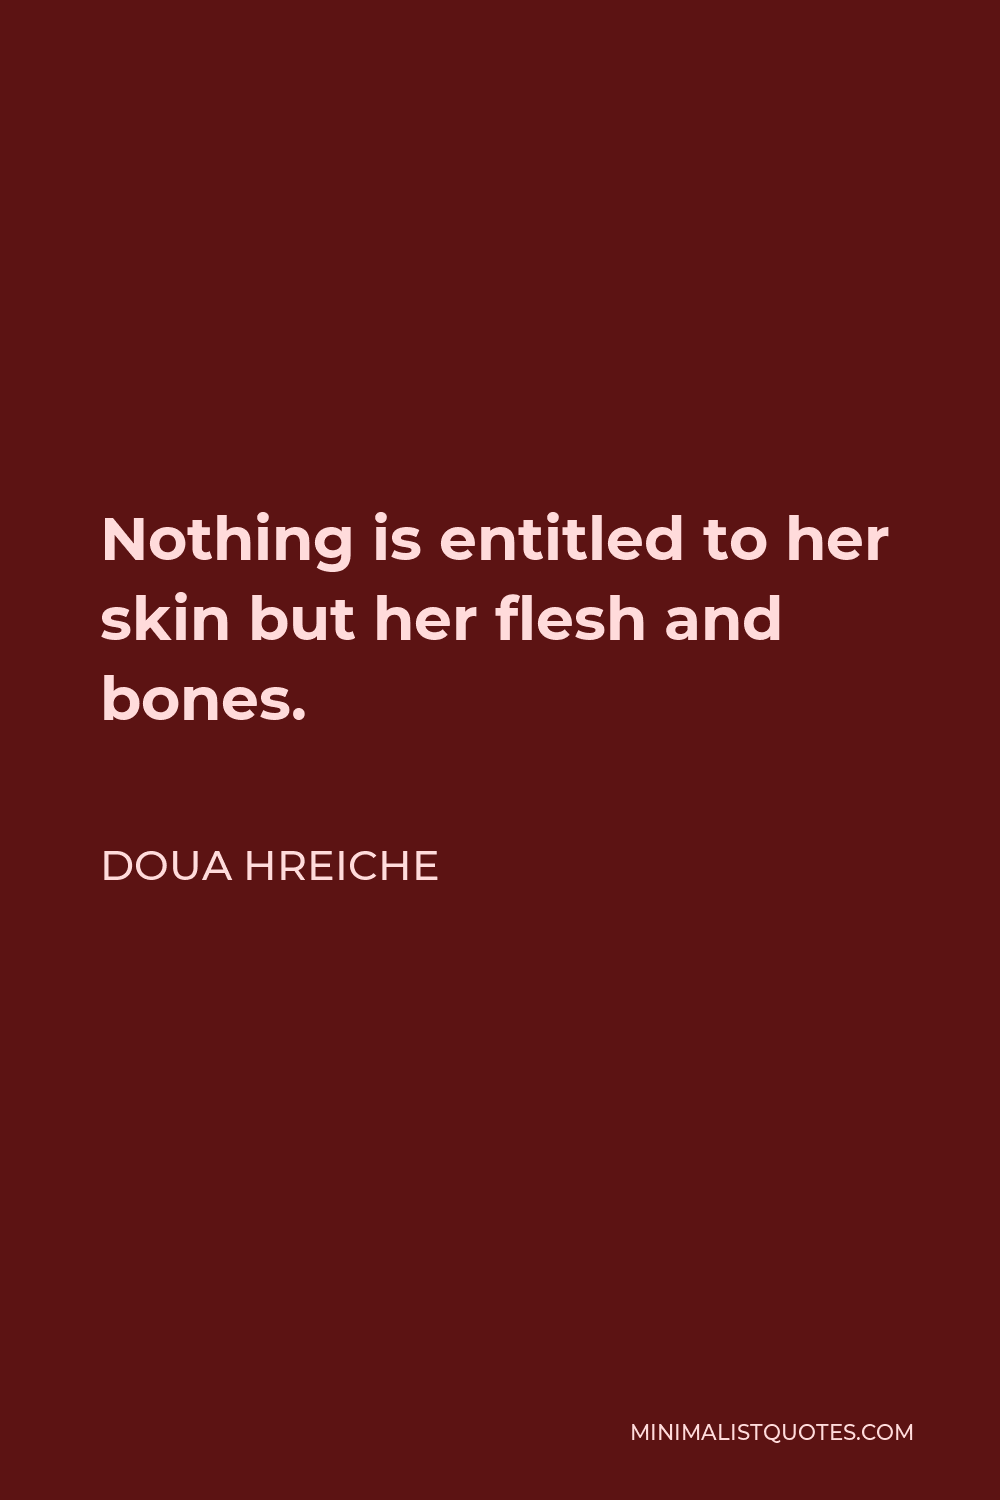 Doua Hreiche Quote - Nothing is entitled to her skin but her flesh and bones.